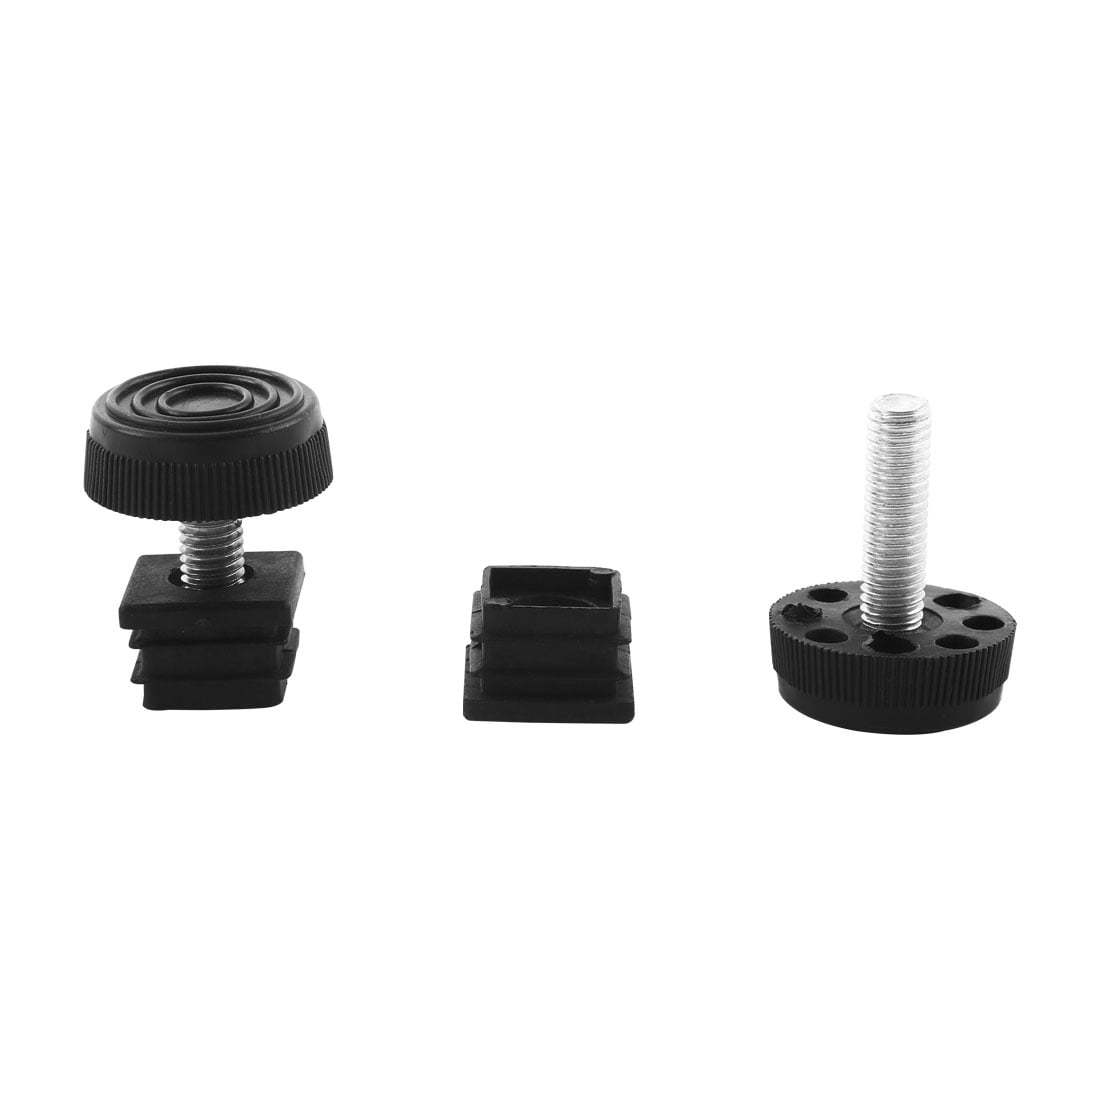 20PCS Adjustable Leveling Feet 31mm Height for Furniture Protect 